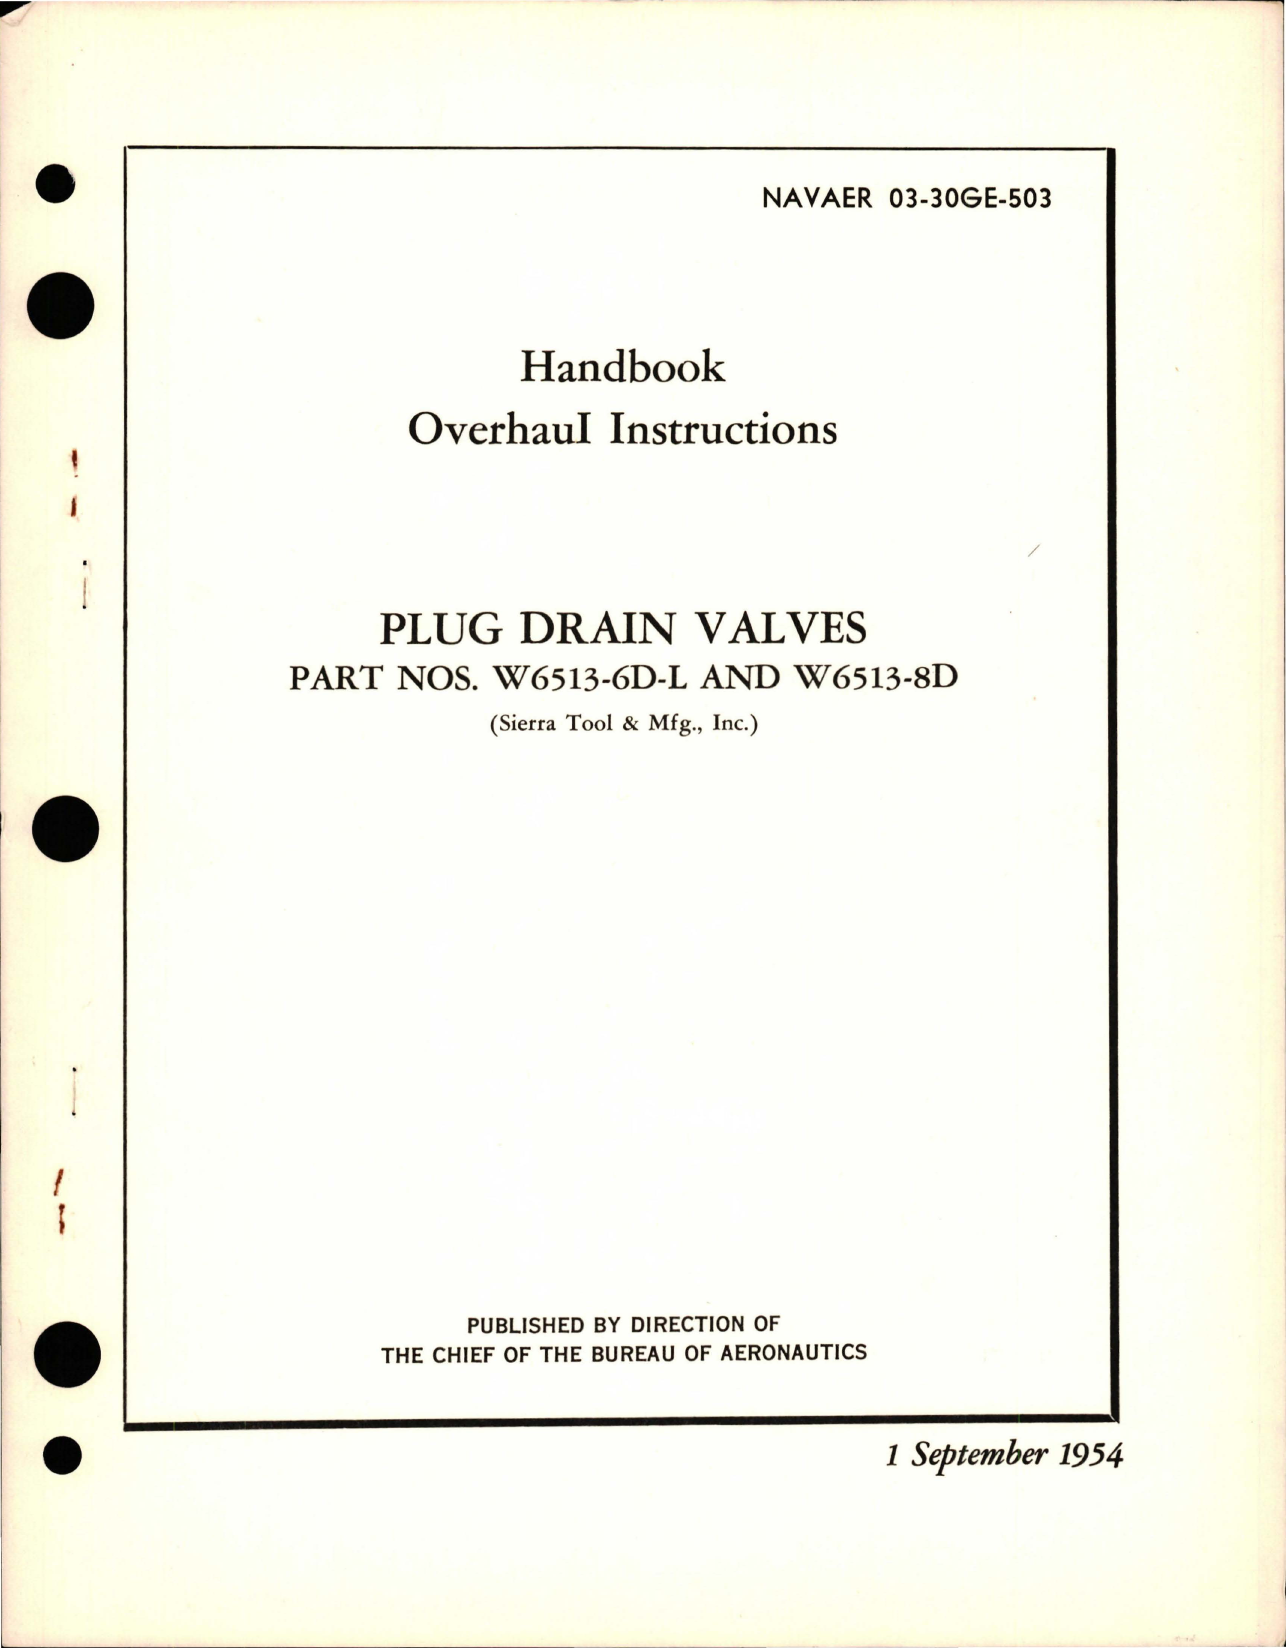 Sample page 1 from AirCorps Library document: Overhaul Instructions for Plug Drain Valves - Parts W6513-6D-L and W6513-8D